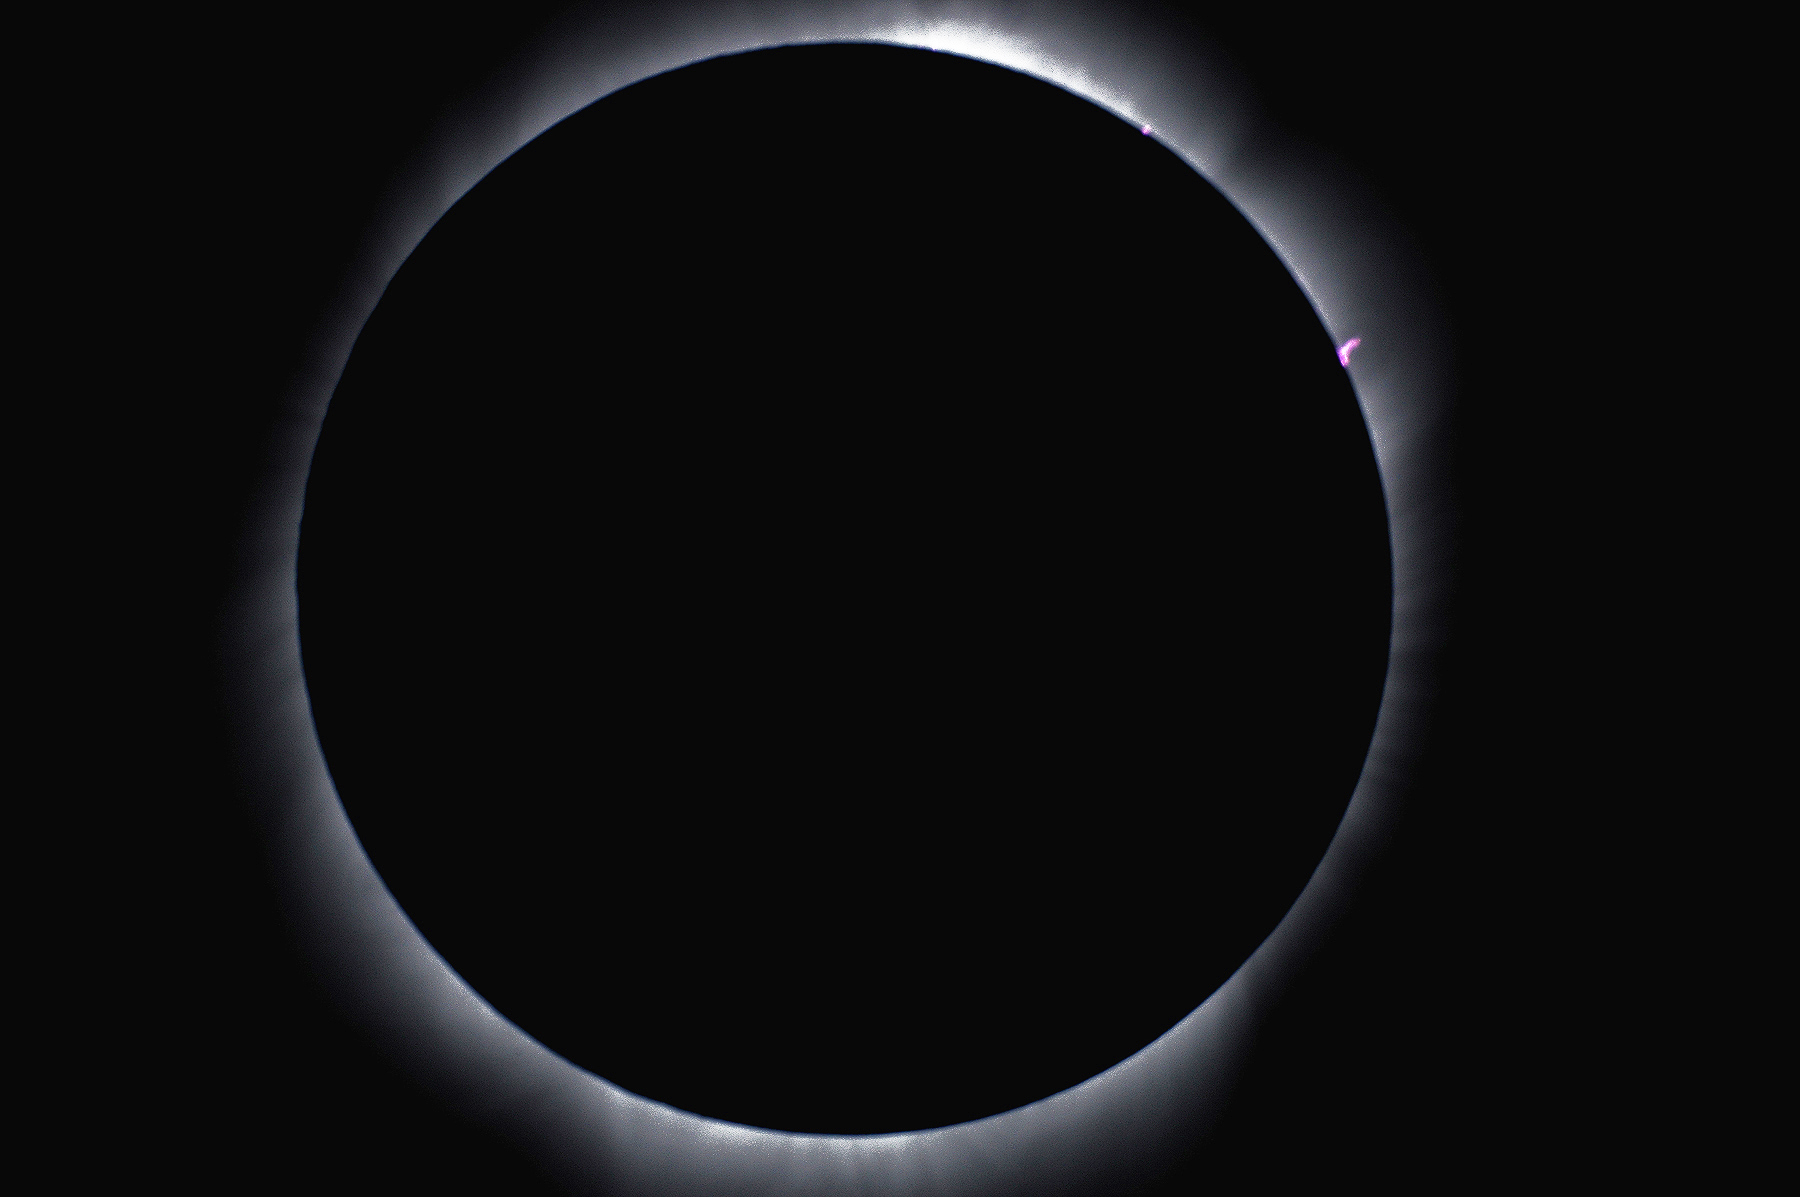 Eclipse 2001 - A74 - Totality